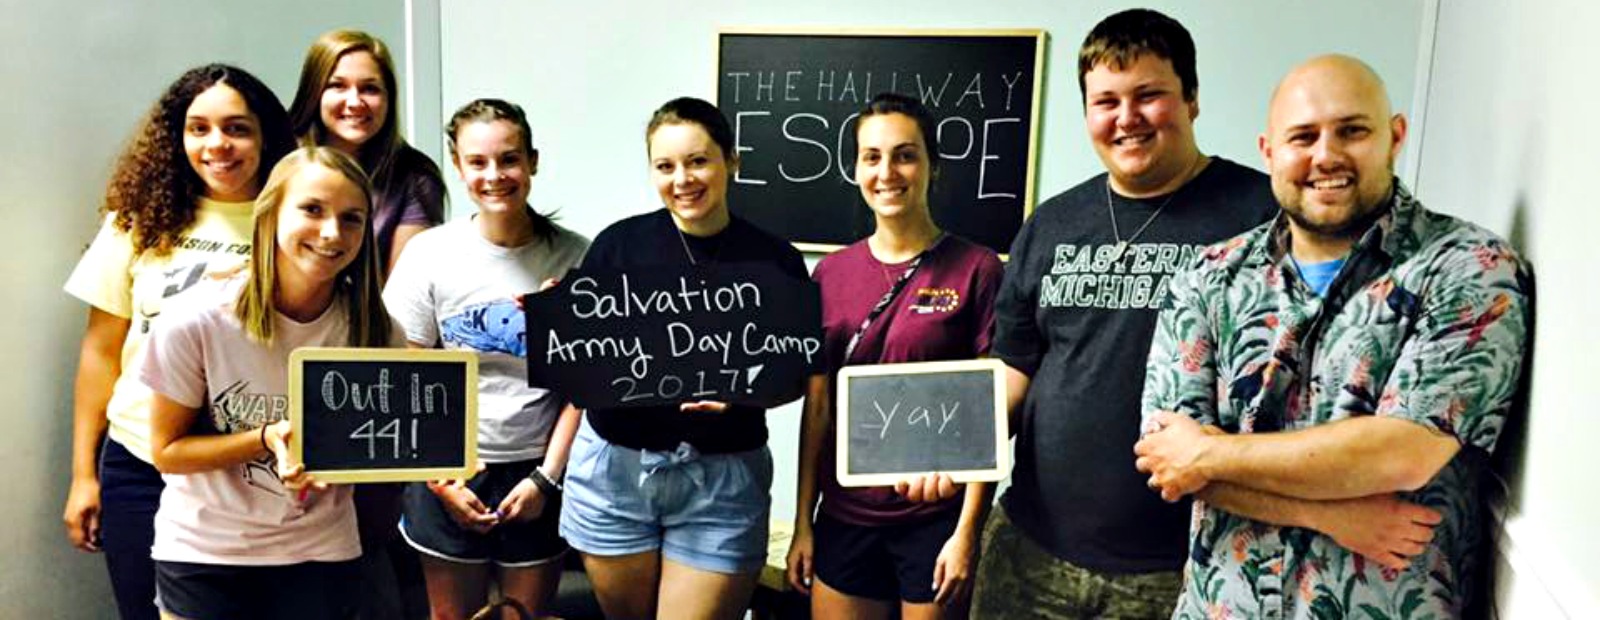 The crew from Salvation Army Day Camp "escaped" the room in under 45 minutes.